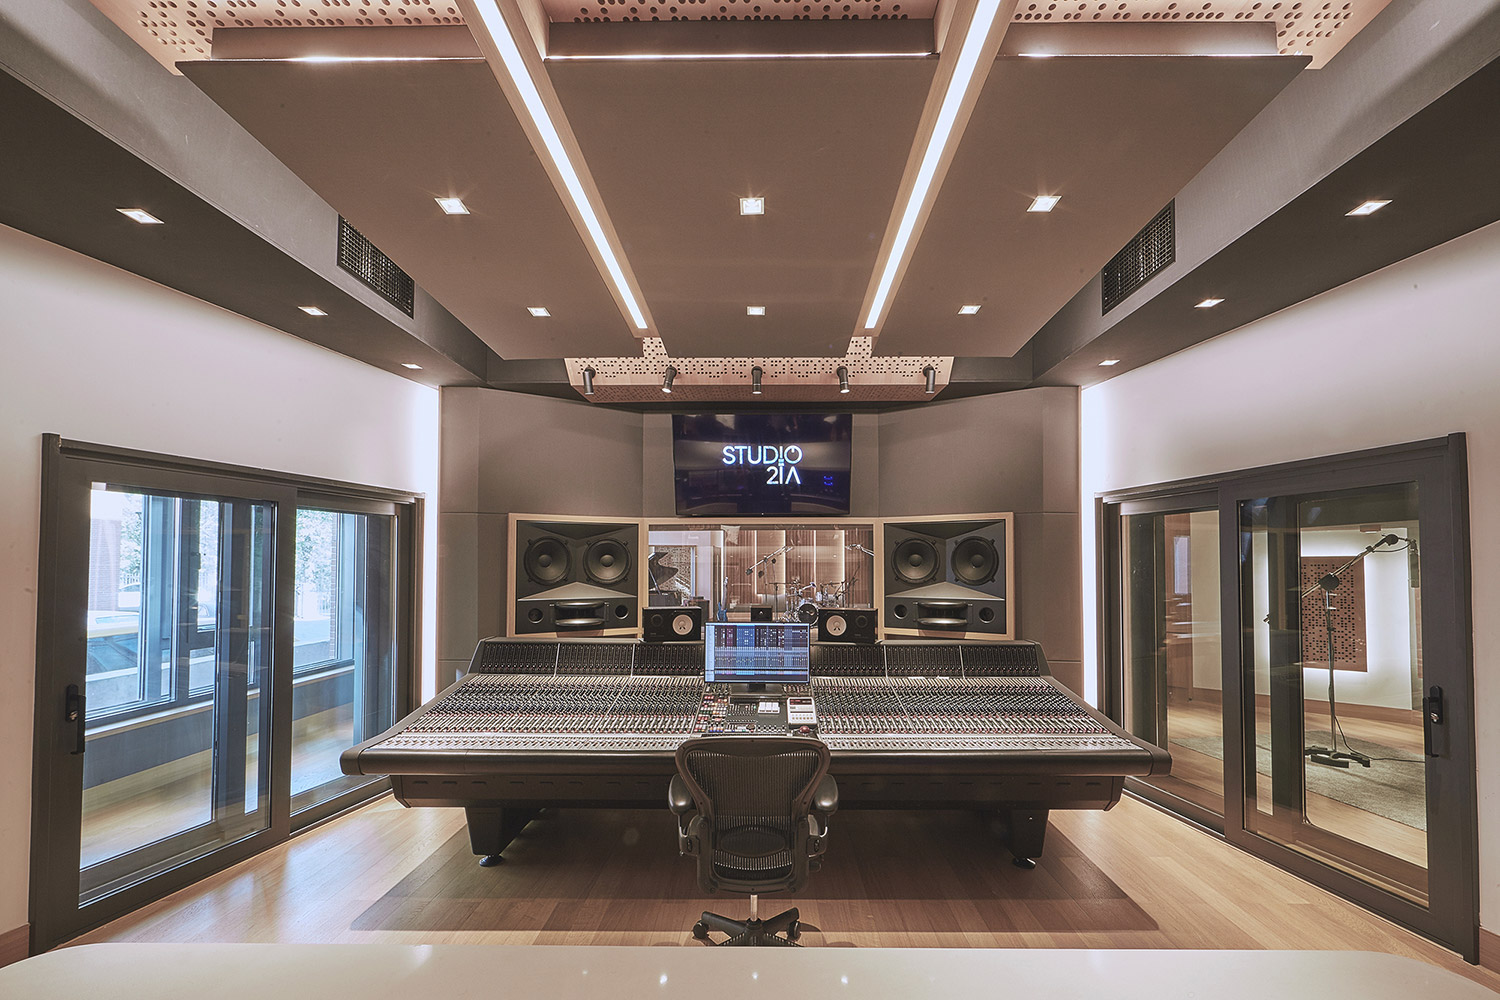 Intrigued by WSDG’s reputation in designing the best recording studios in the world, multi-talented recording and mixing engineer TC Zhou started a deep collaboration with our global team for his brand-new Studio 21A facility in Beijing, China. Control Room A.